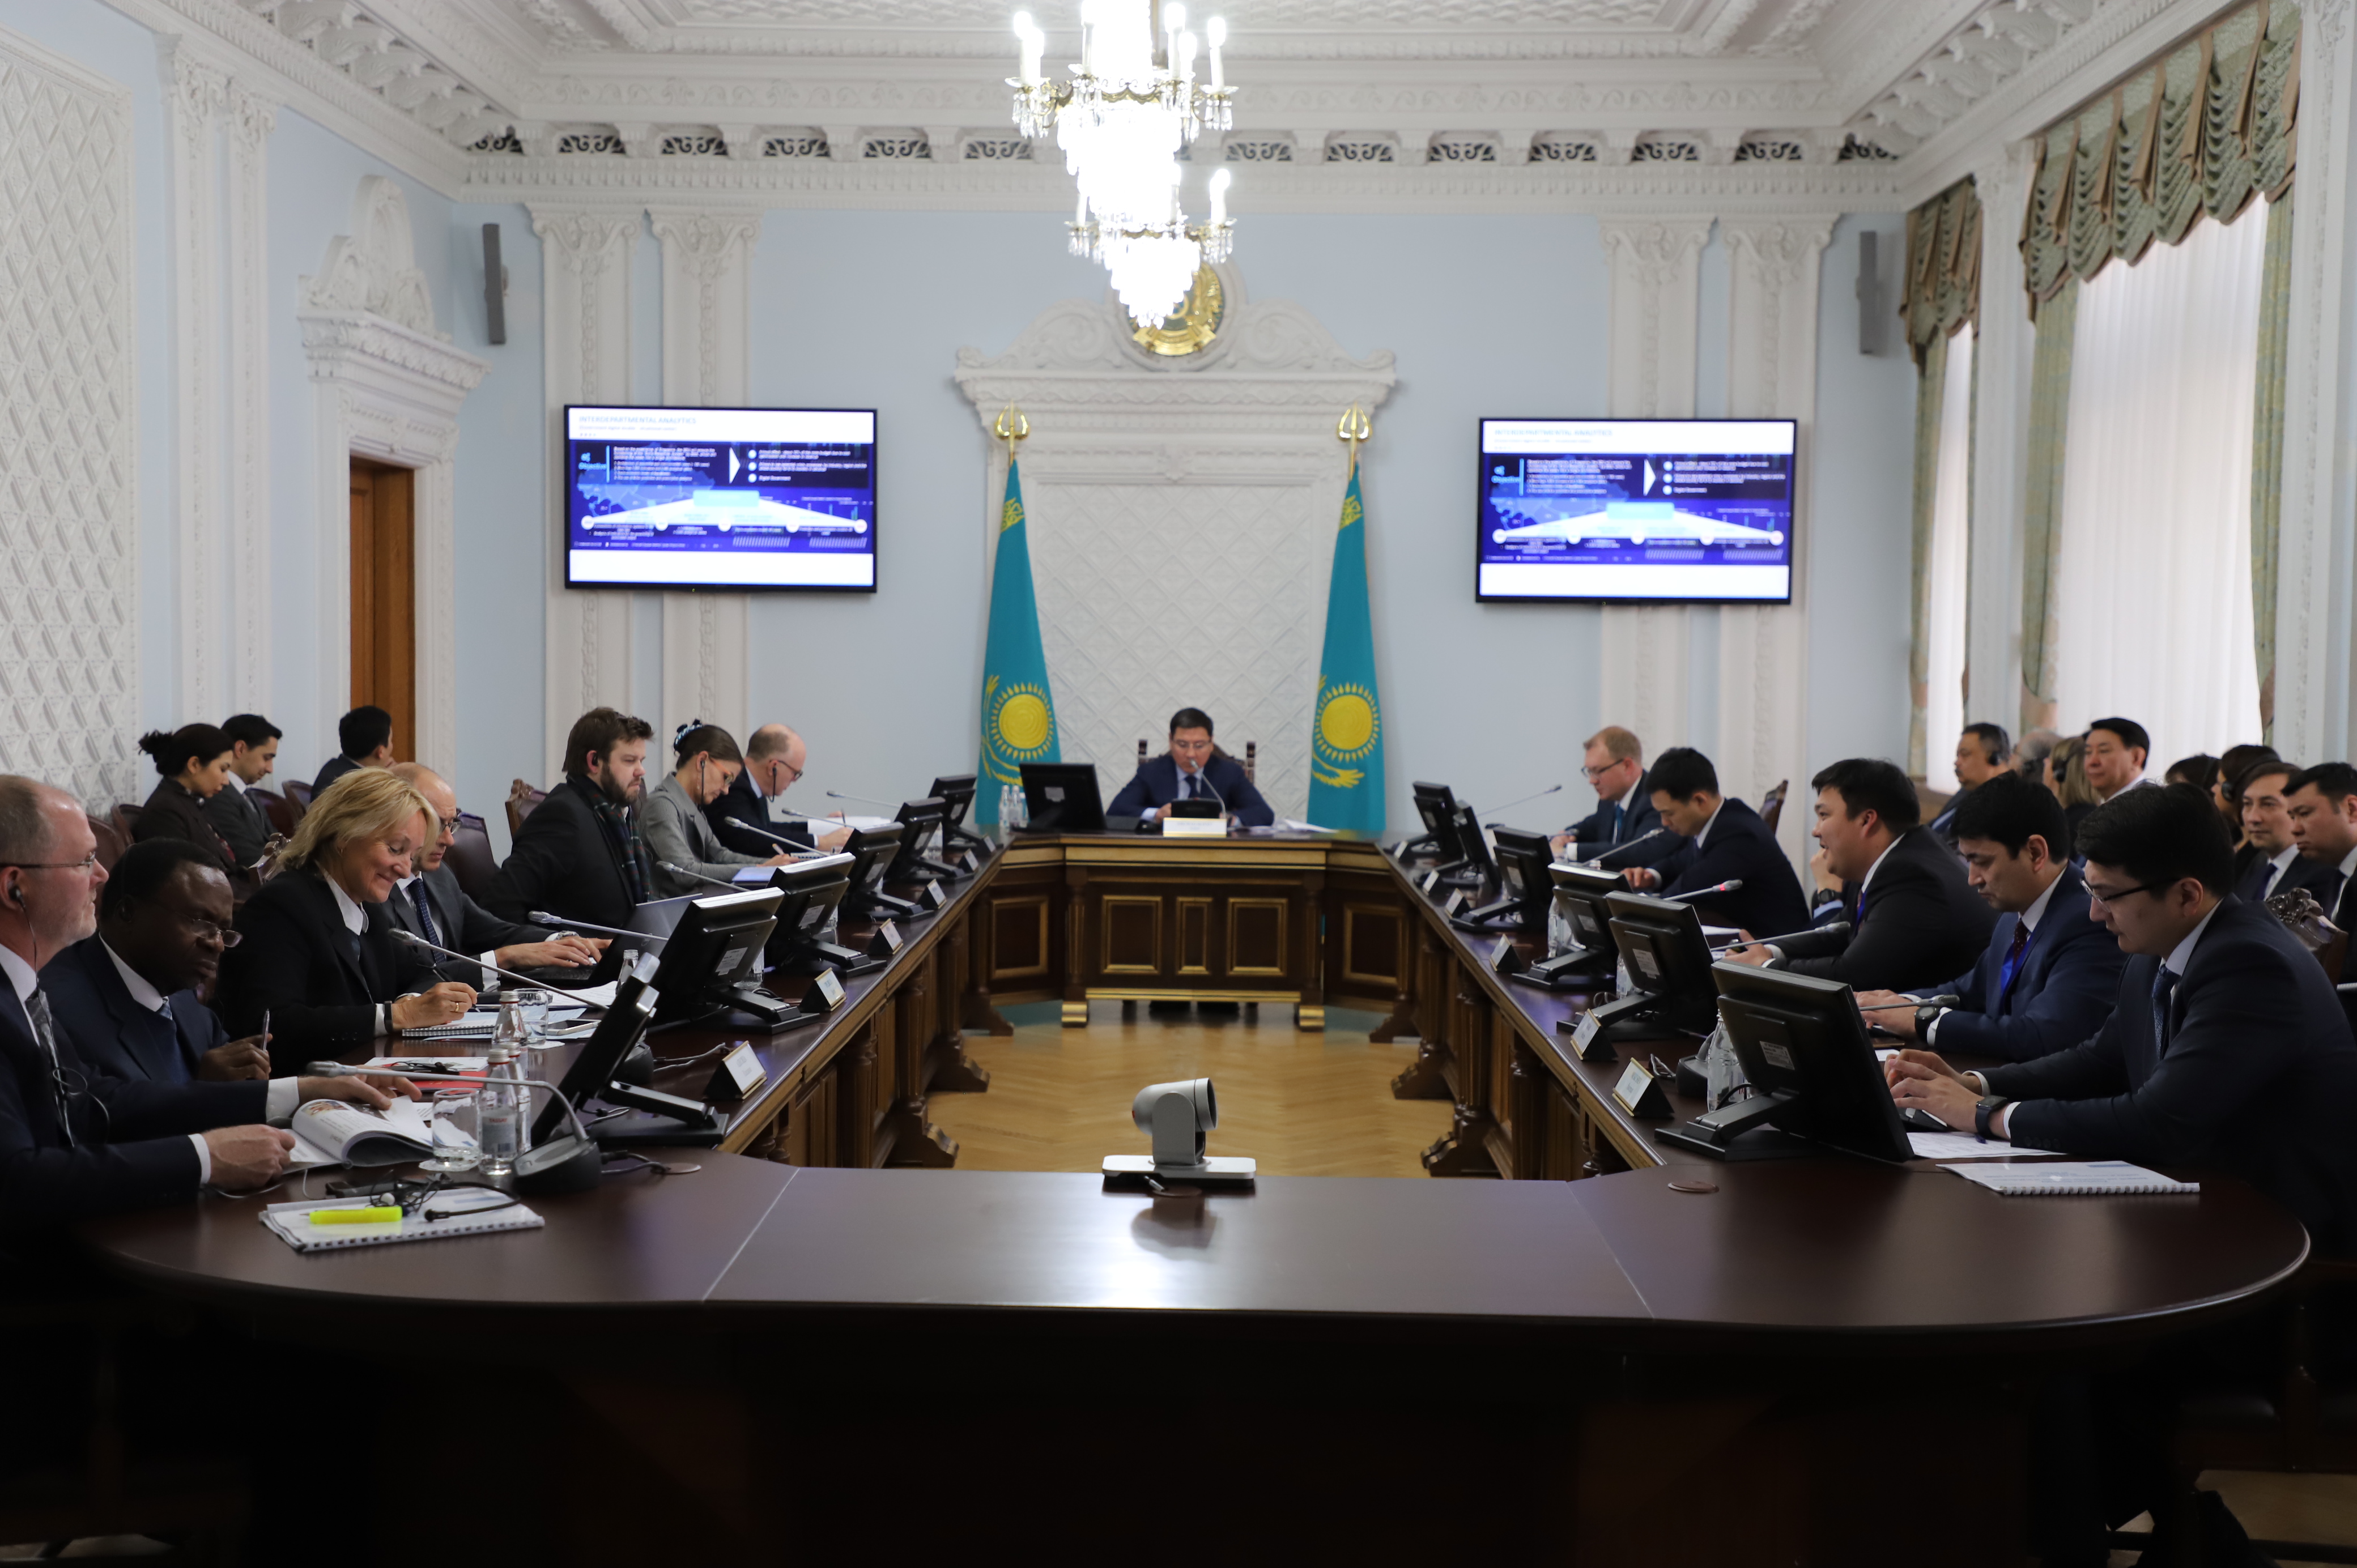 Prospects of artificial intelligence development in Kazakhstan were discussed at the meeting of the International Expert Counci